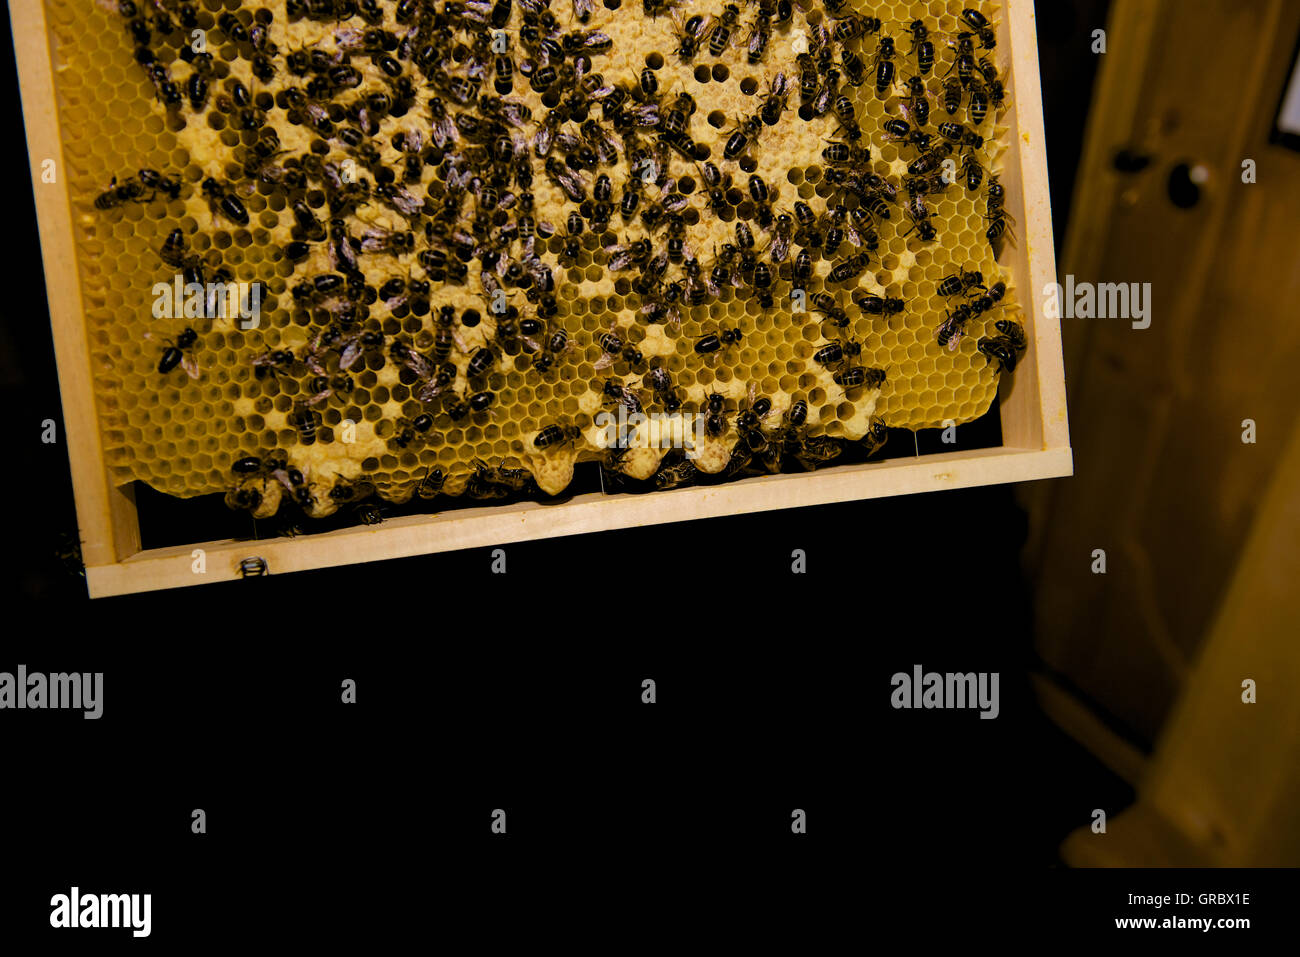 Honeycomb With With Queen Cells And Lots Of Bees Stock Photo